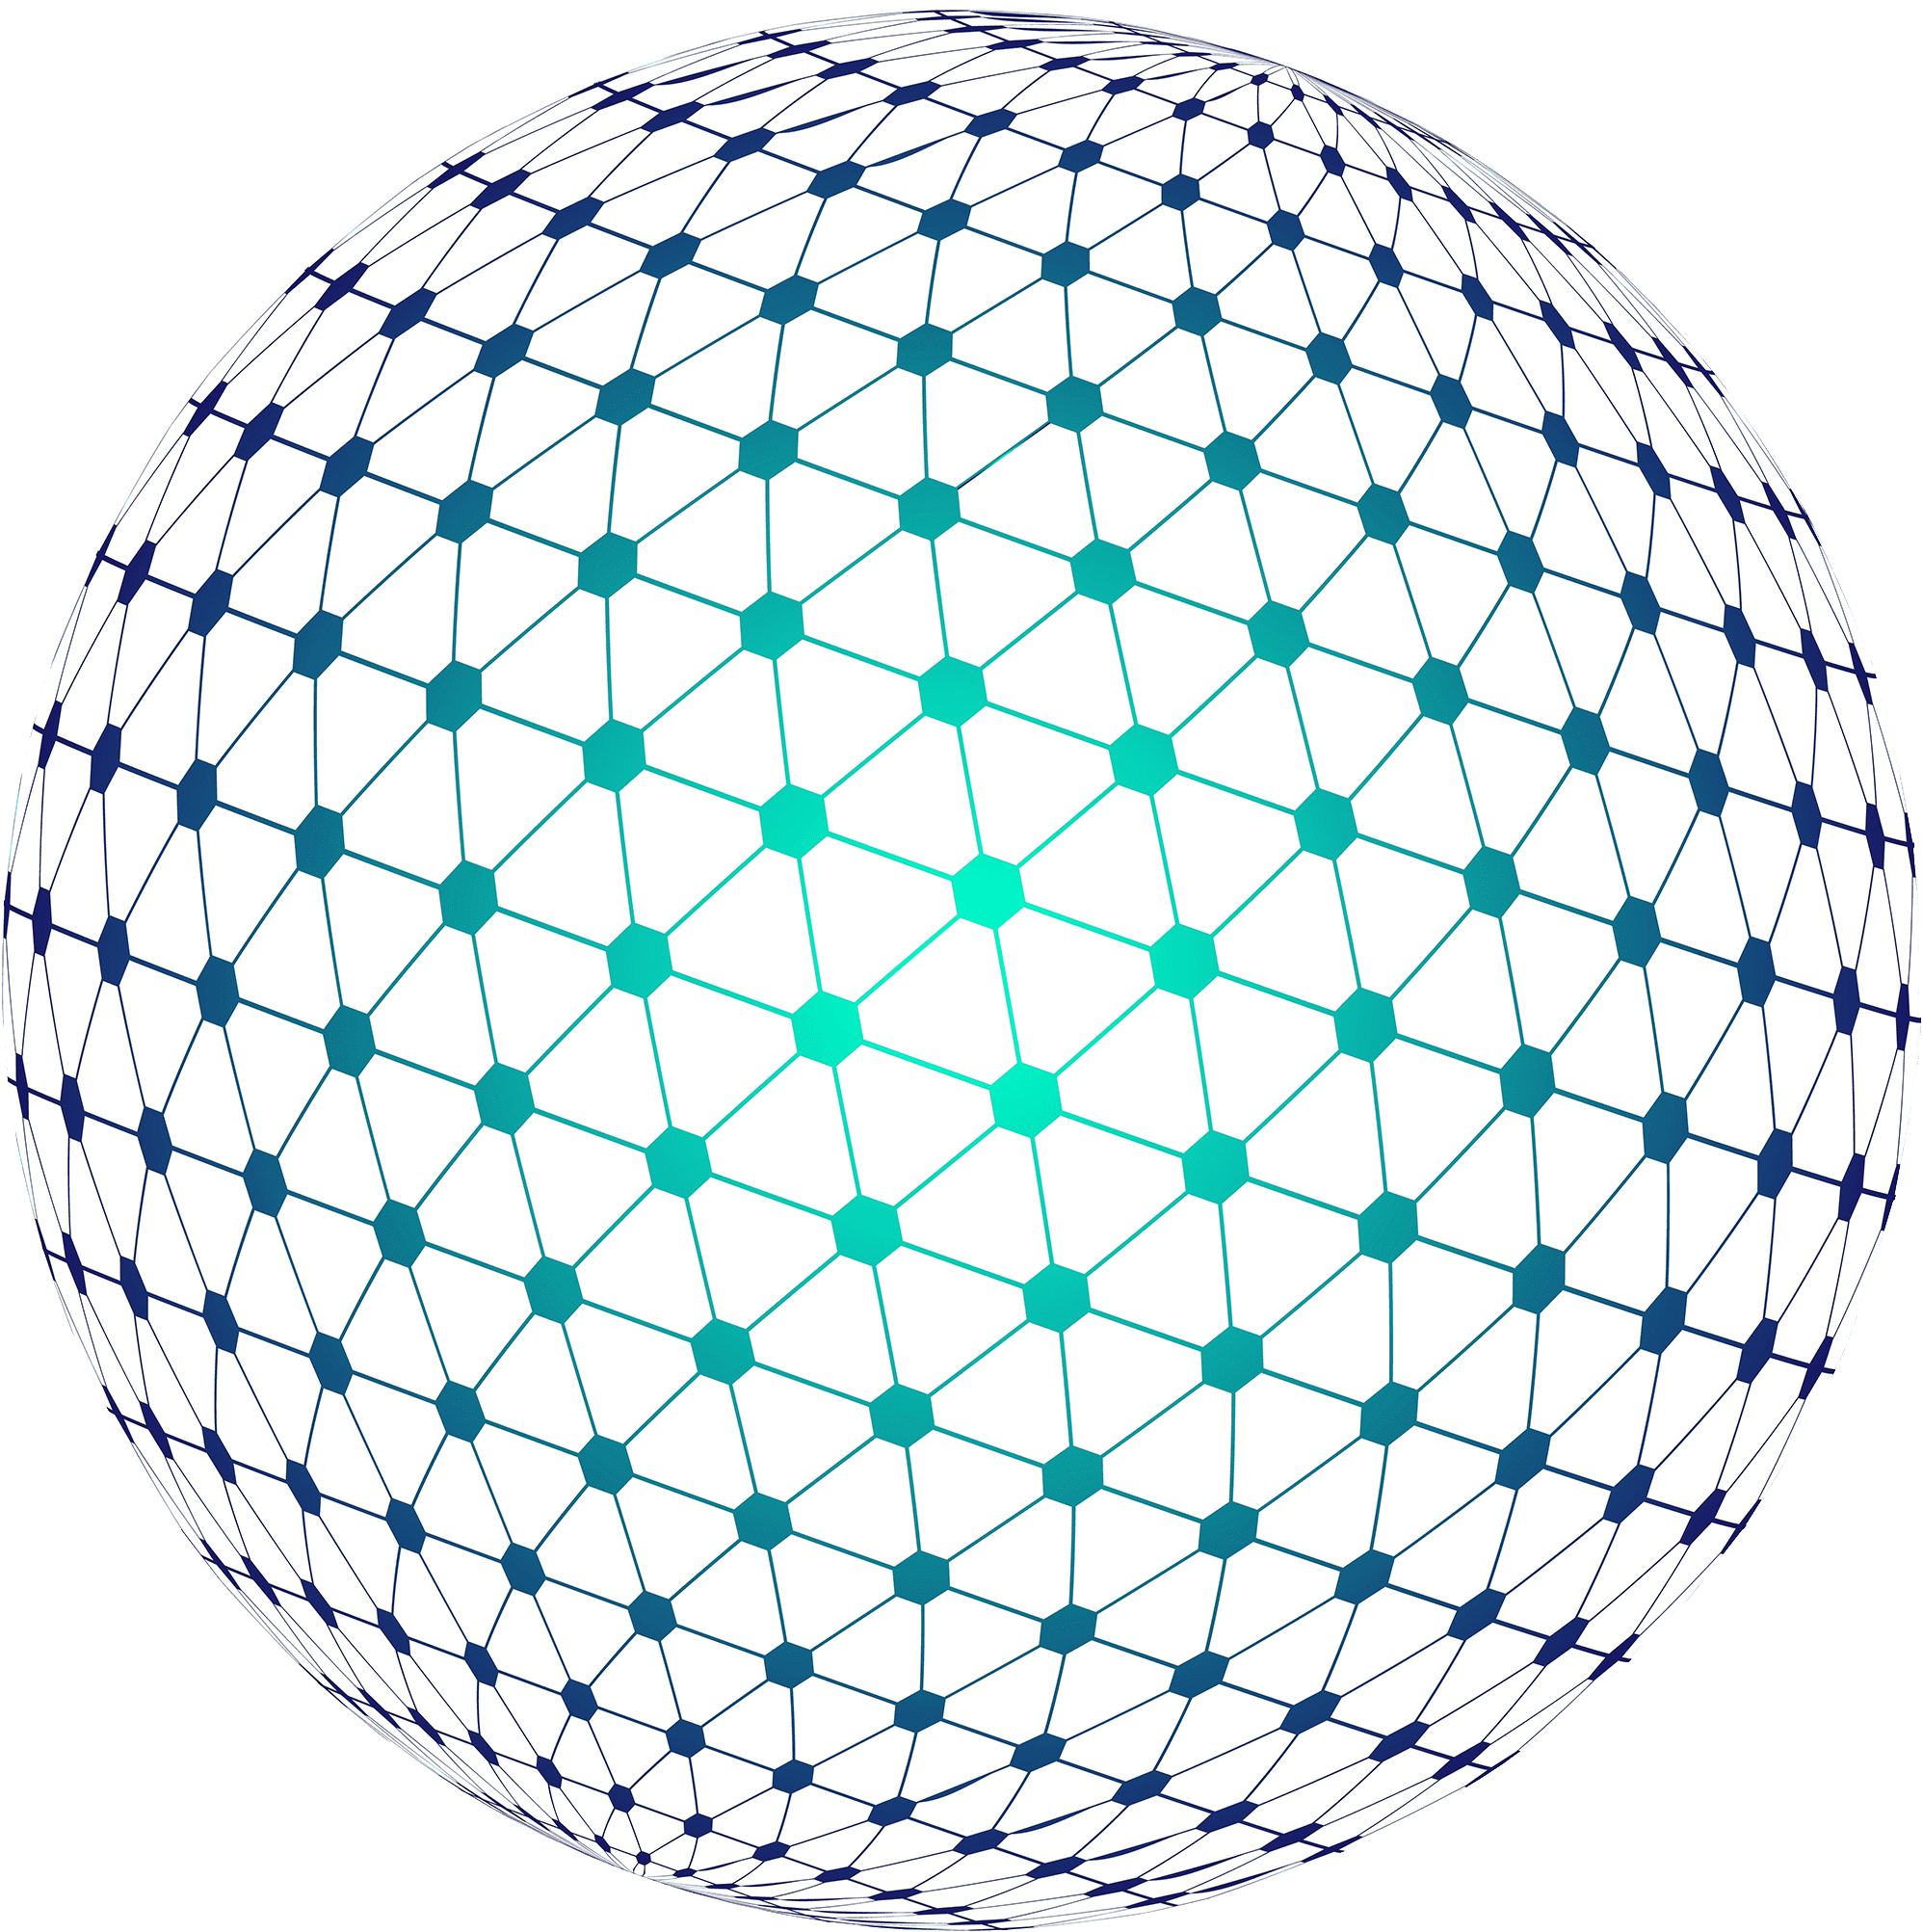 A 3D spherical mesh structure composed of interconnected hexagonal and pentagonal patterns, featuring a gradient that transitions from dark blue on the outer edges to bright turquoise in the center. The white background enhances the geometric design.